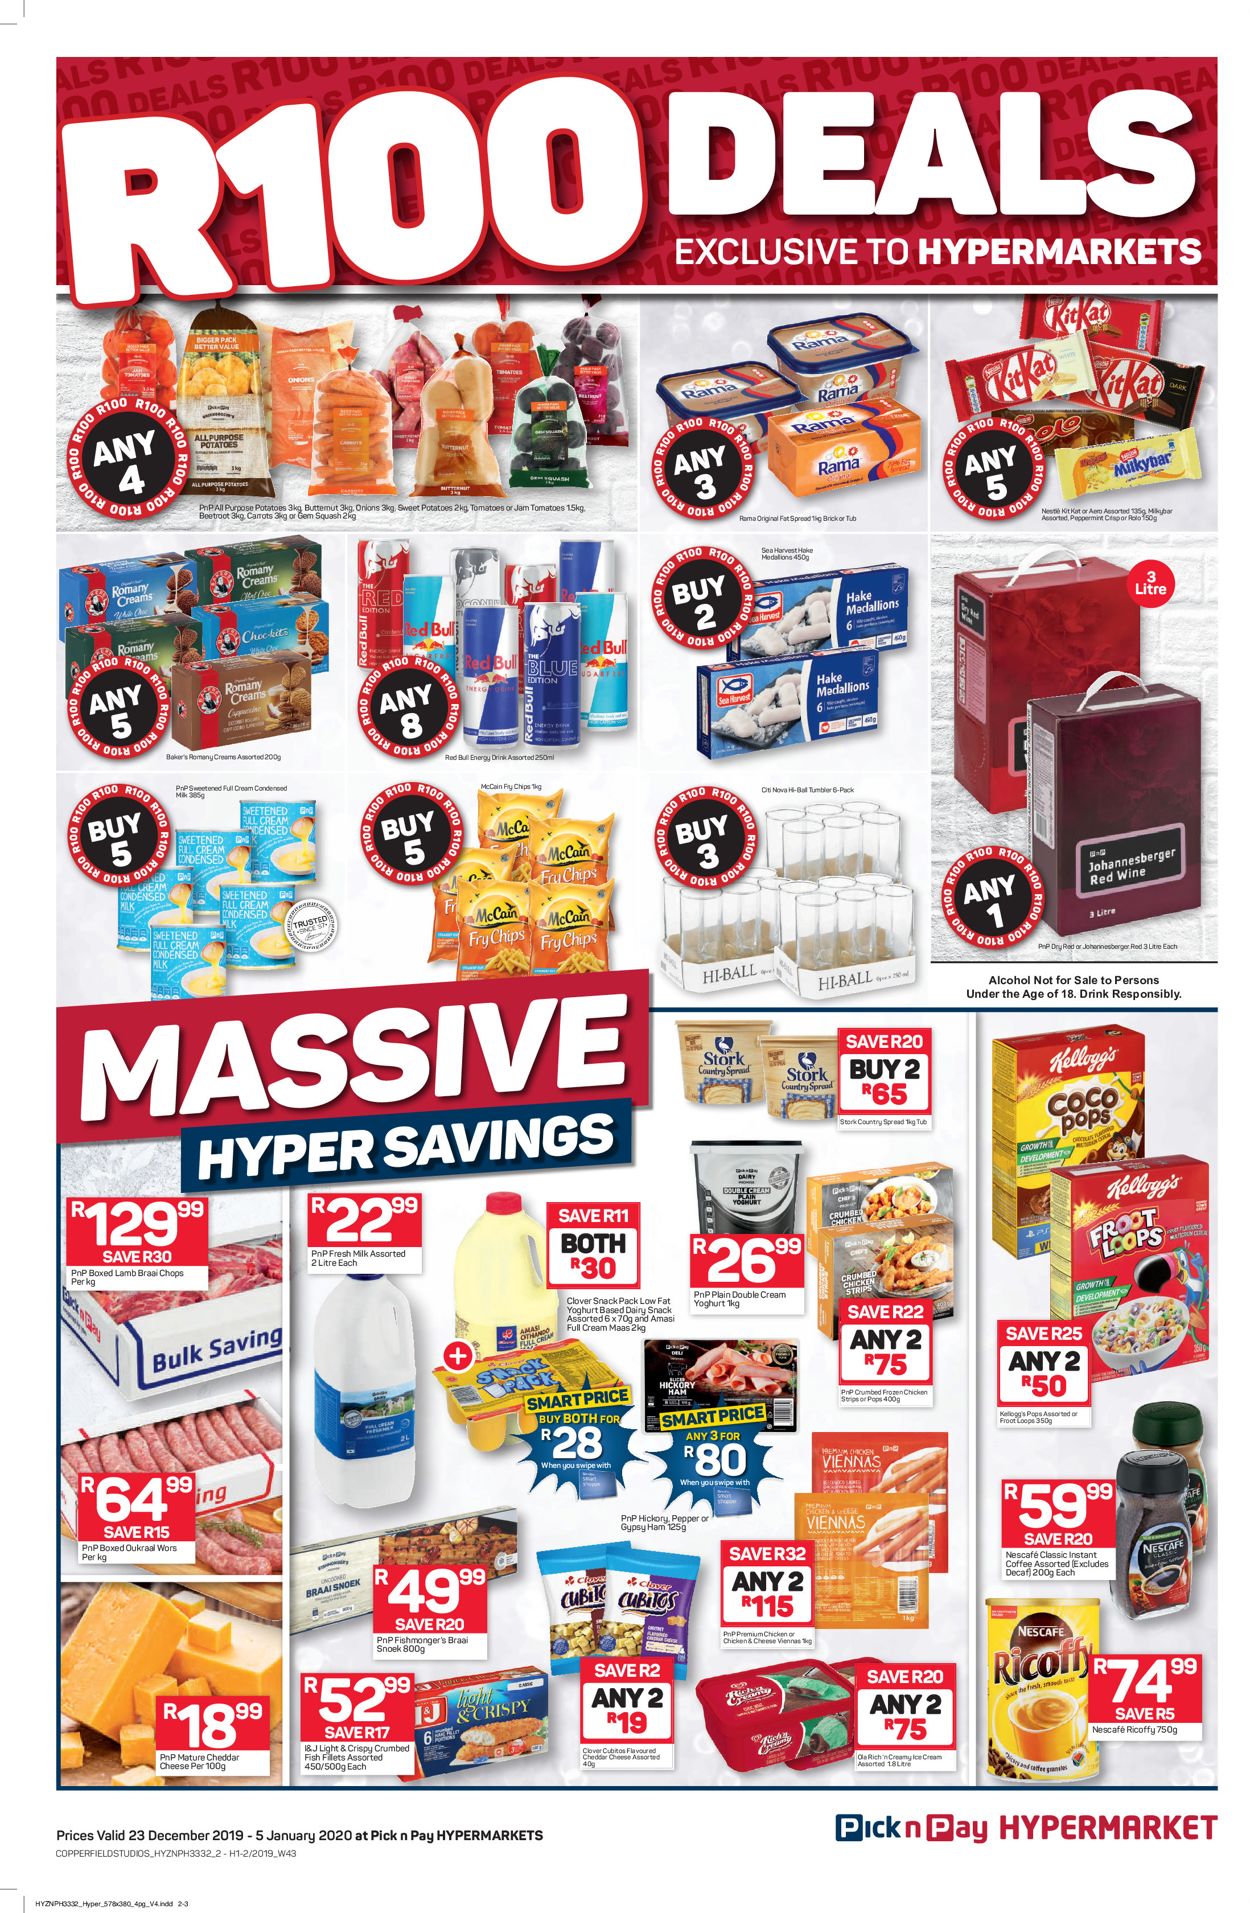 Pick n Pay Catalogue - 2019/12/23-2020/01/05 (Page 3)